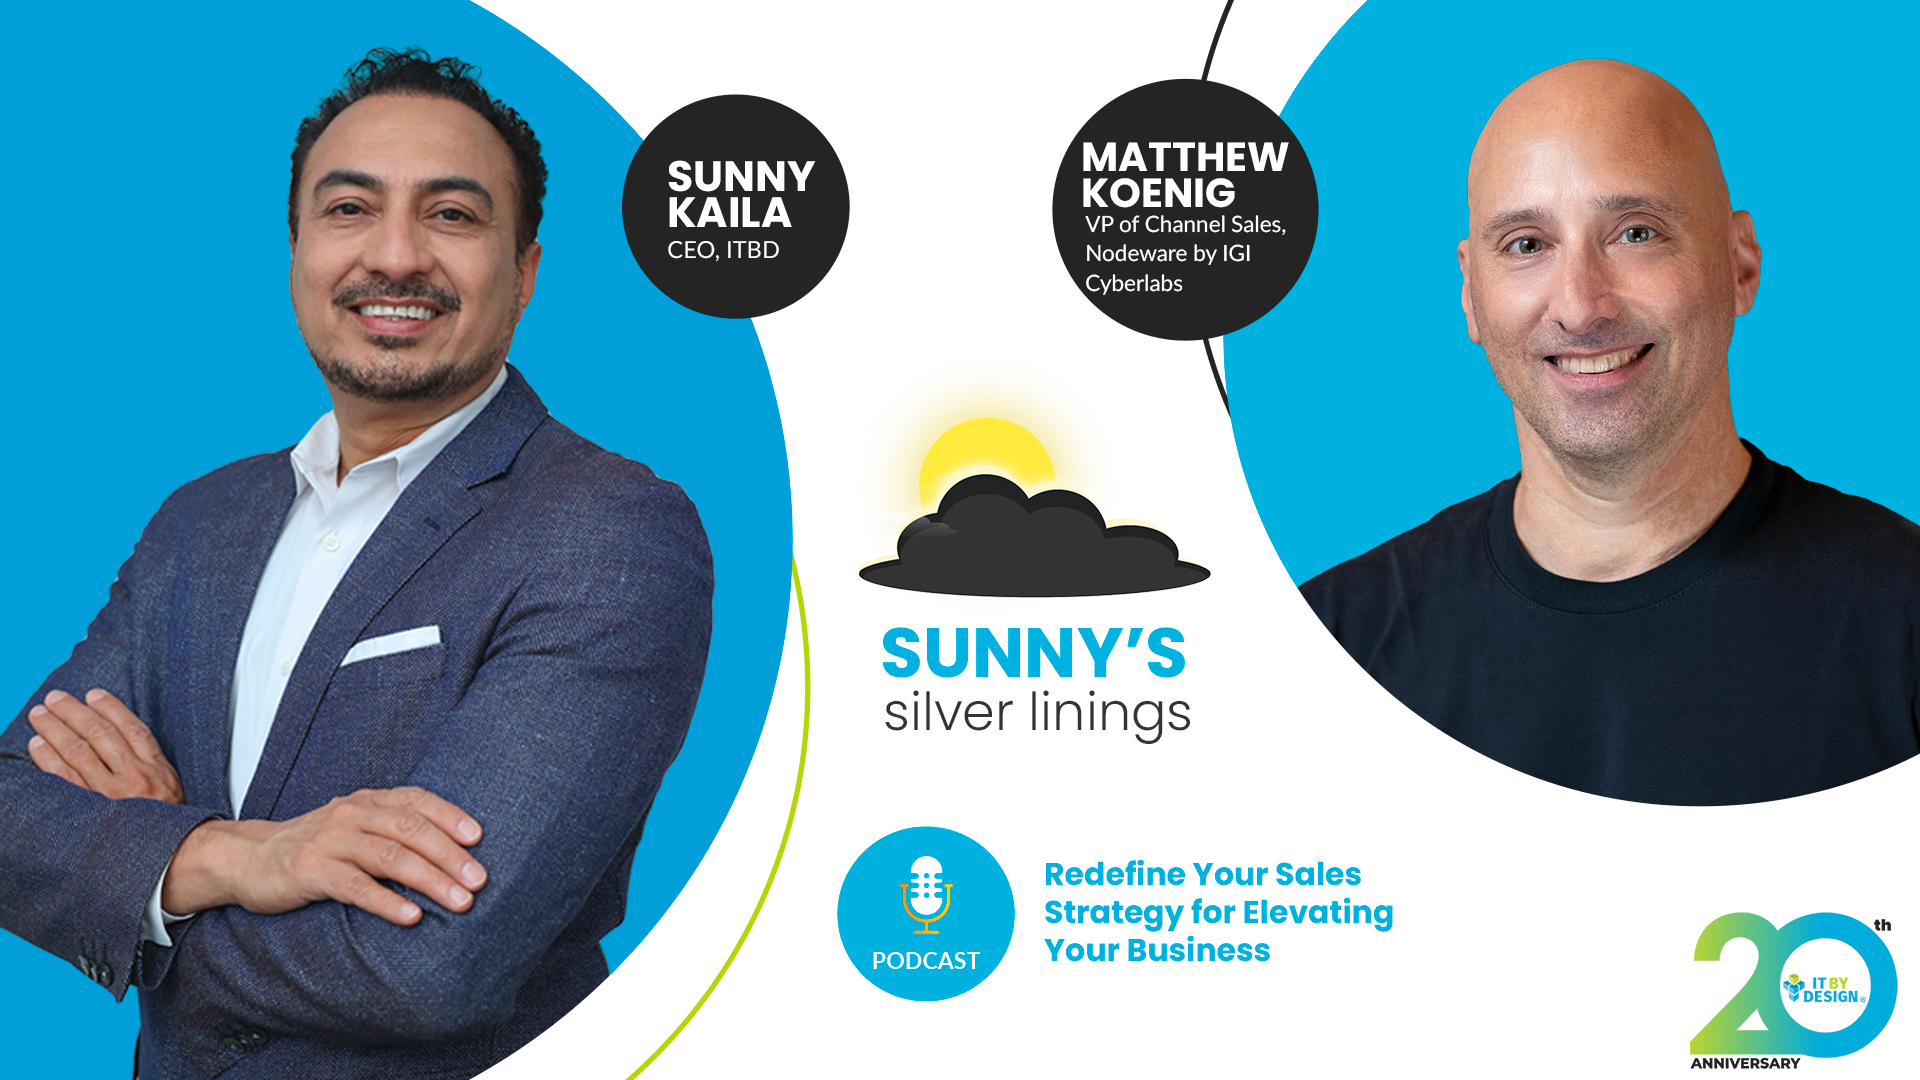 Redefine your sales strategy for elevating your business with Matthew Koenig